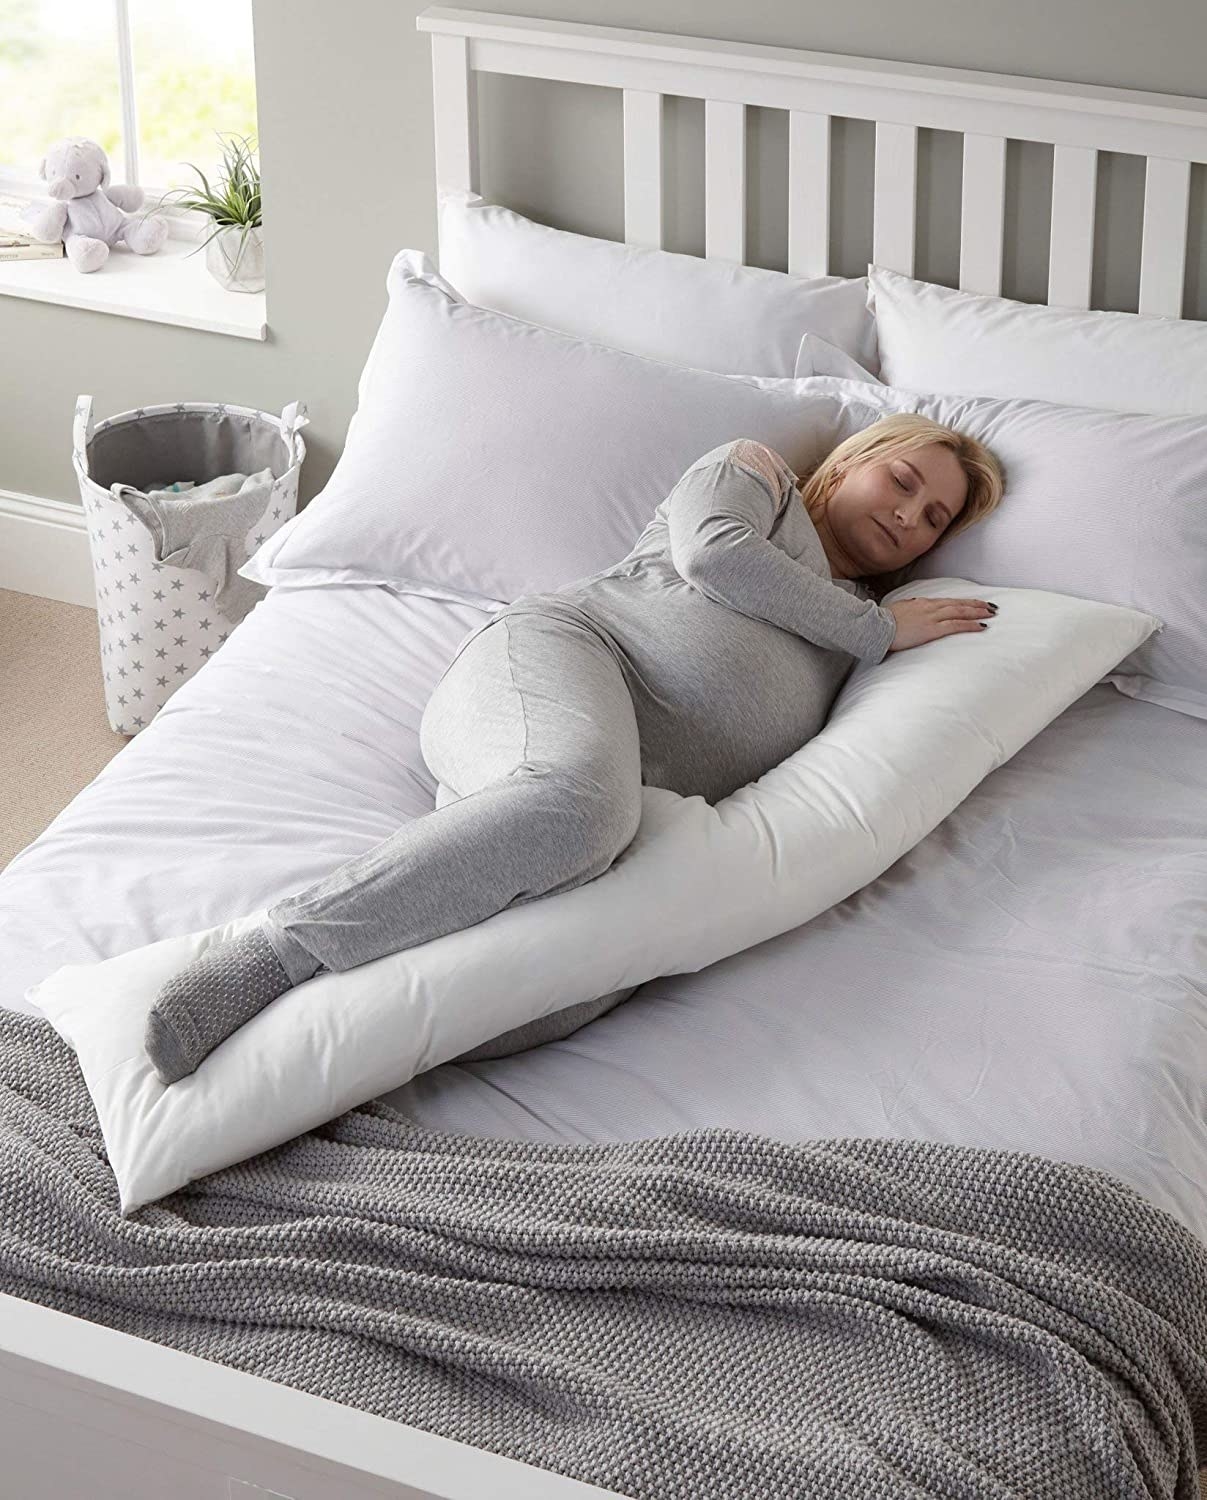 A woman sleeping on her side with a long pillow across her body